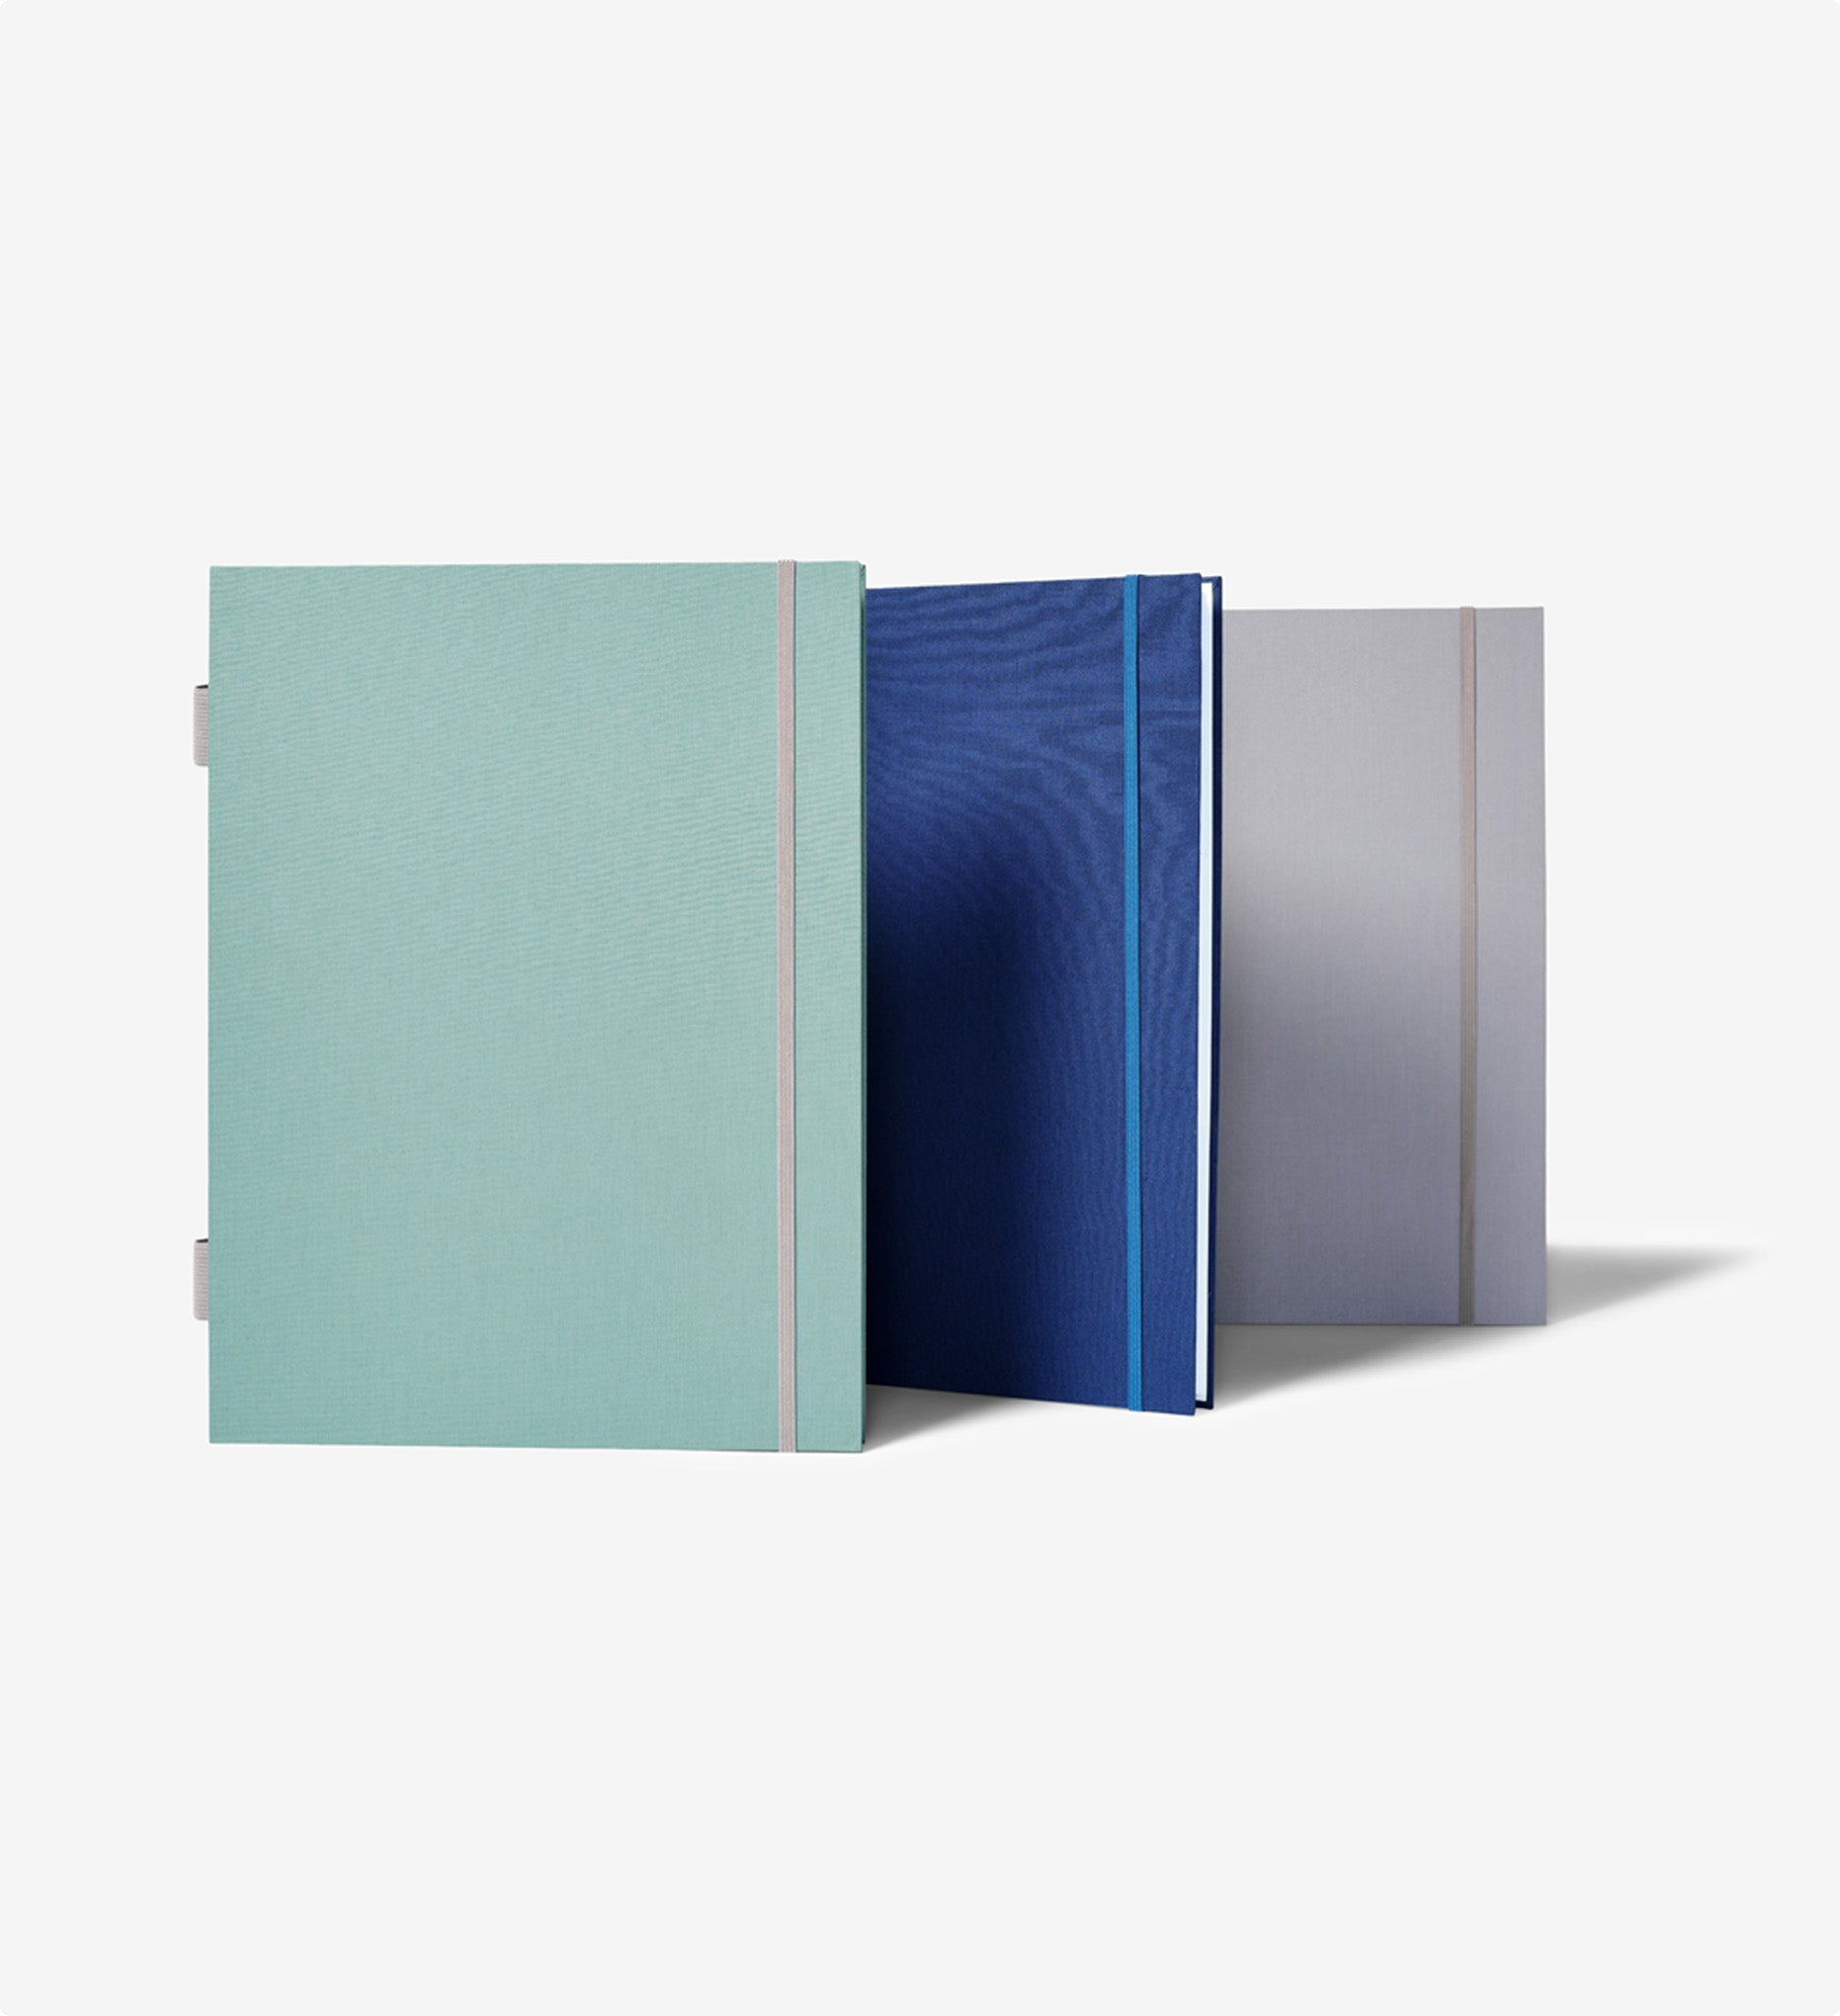 Closed fan folios, moss, blue and gray one alined in front of each other